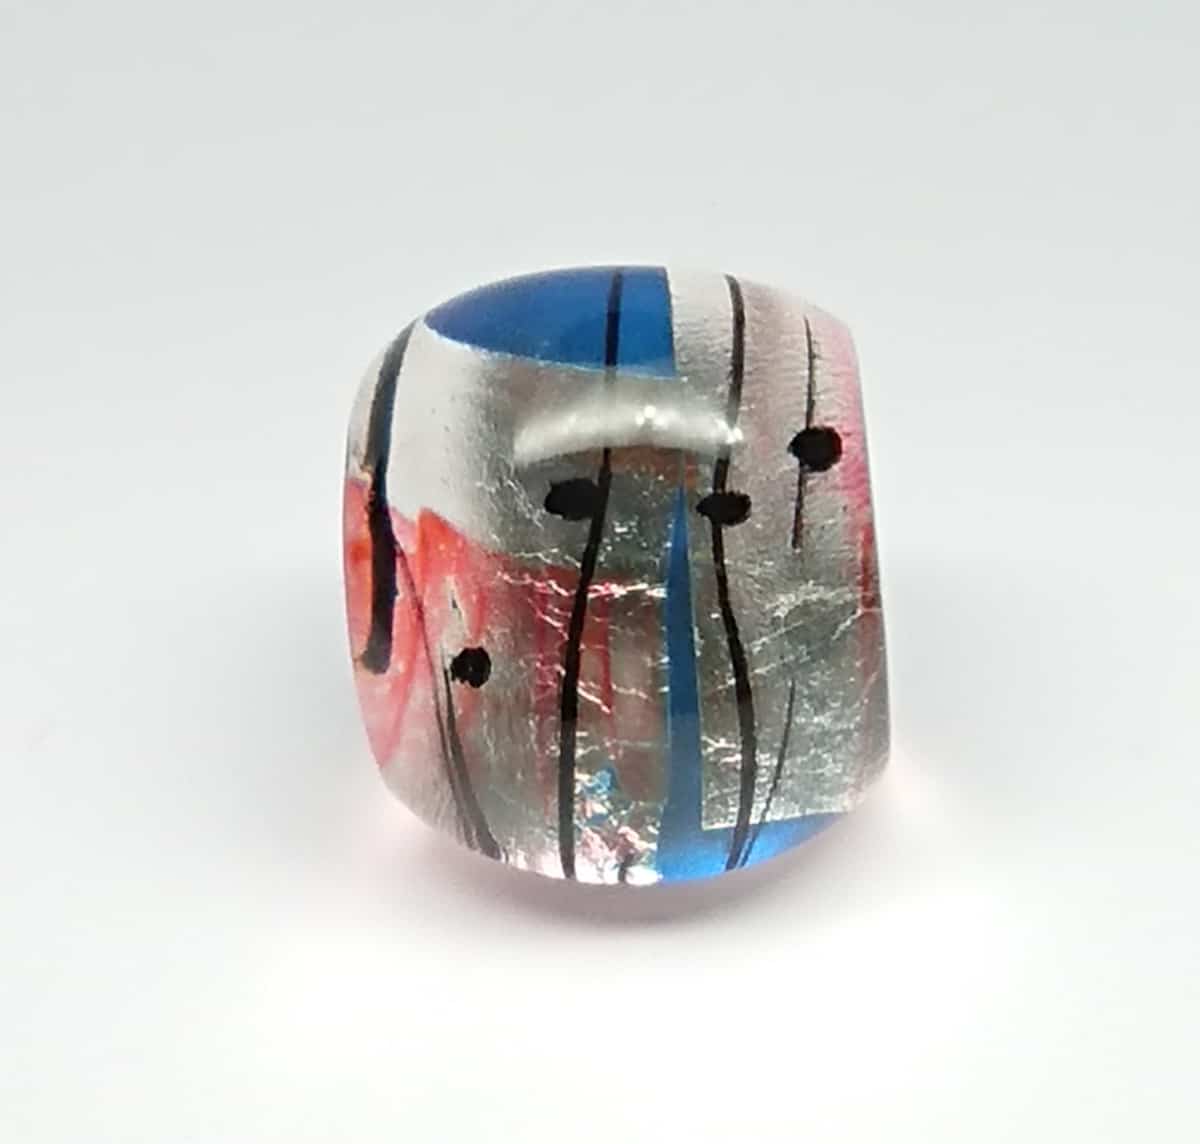 Patterned Silver Acrylic Ring Gail Klevan